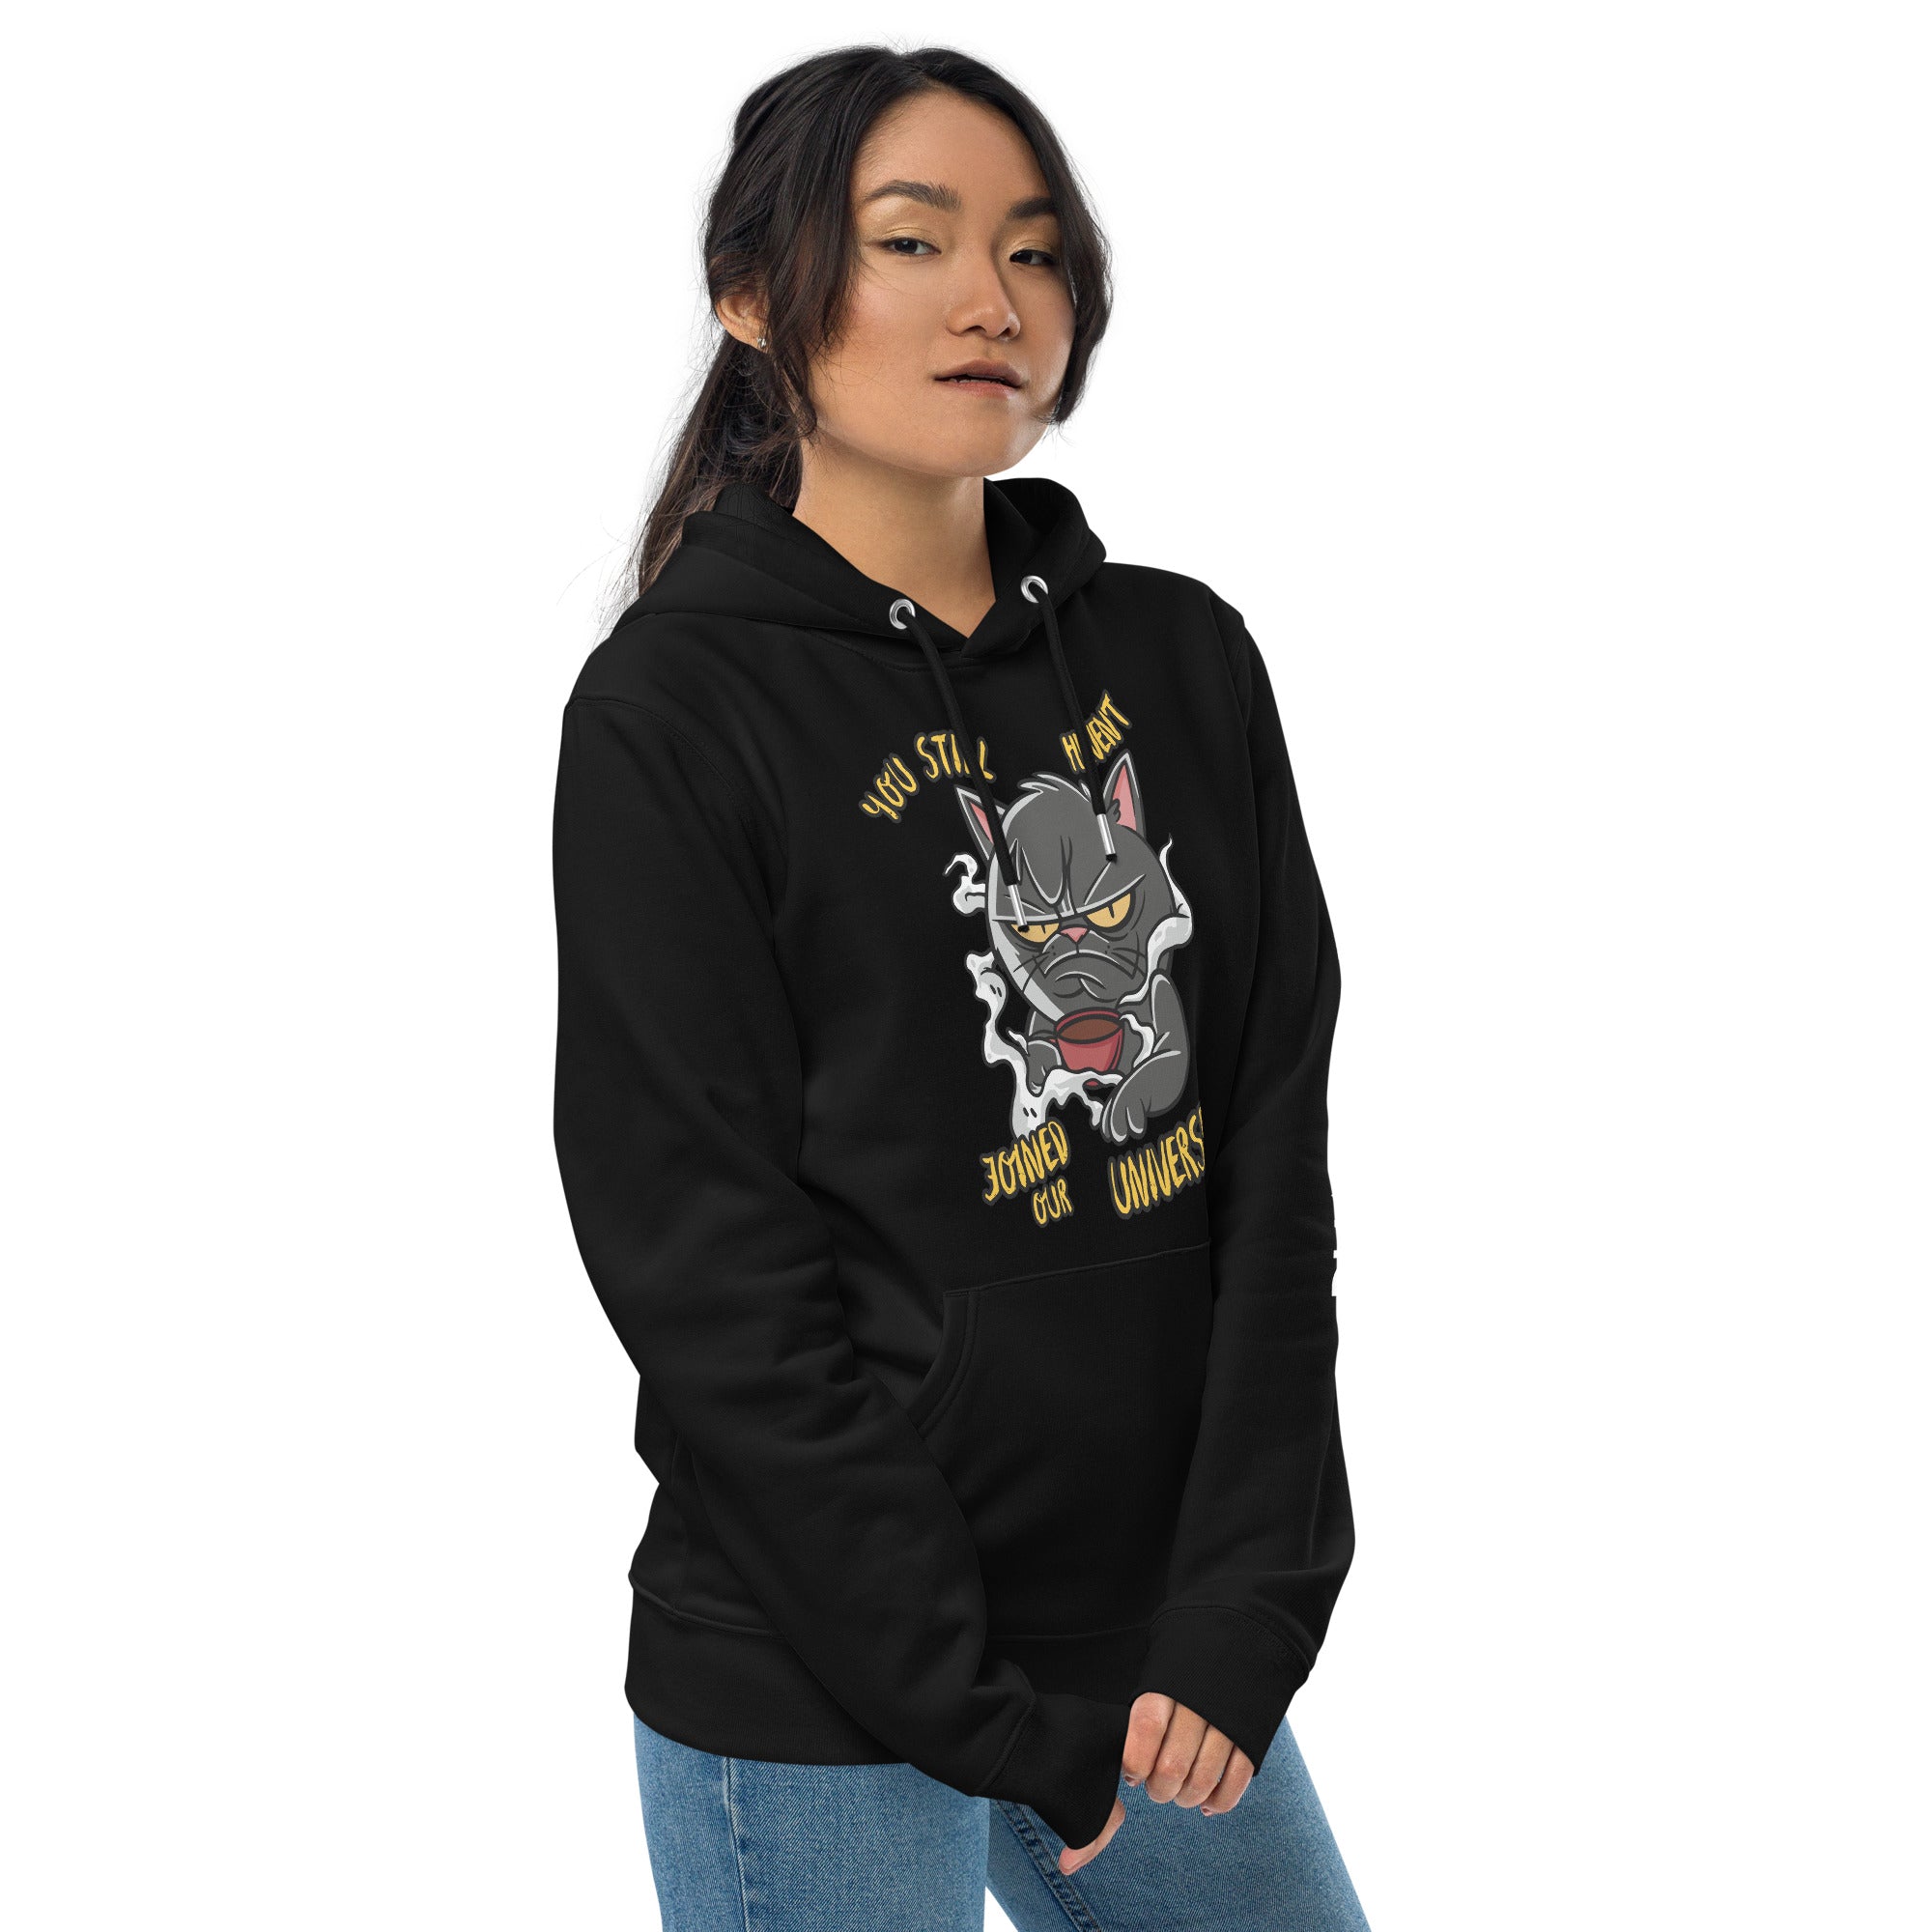 "HAVEN'T JOINED OUR UNIVERSE?" PU UNISEX ECO HOODIE